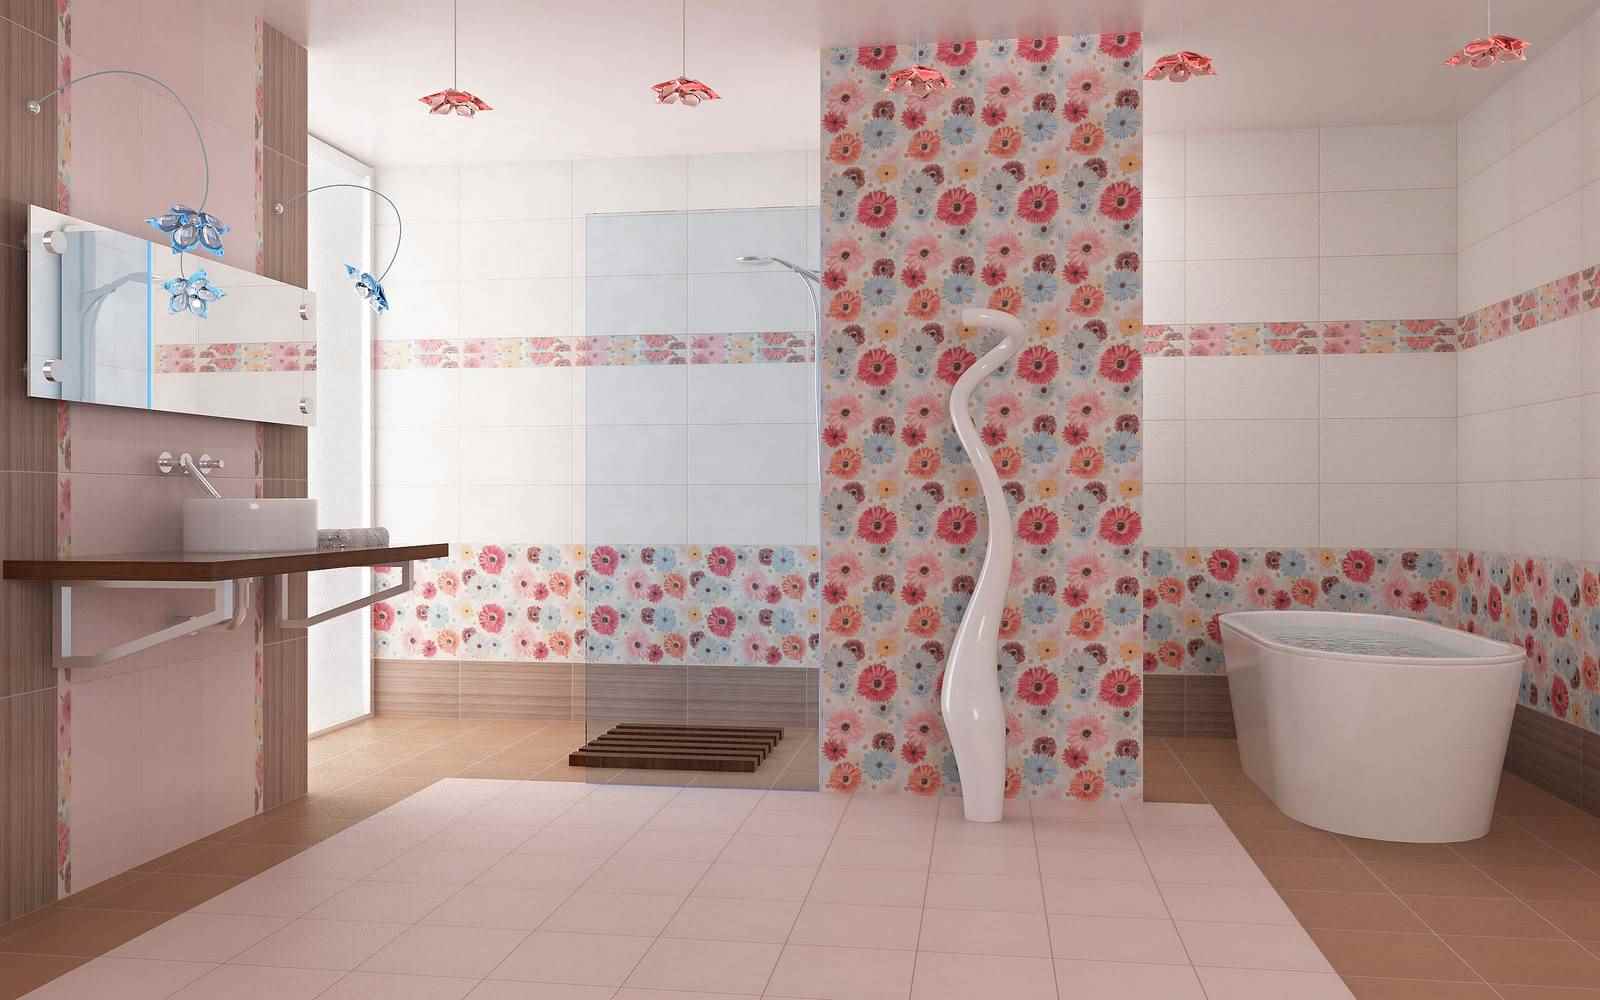 An example of a bright interior tile laying in the bathroom